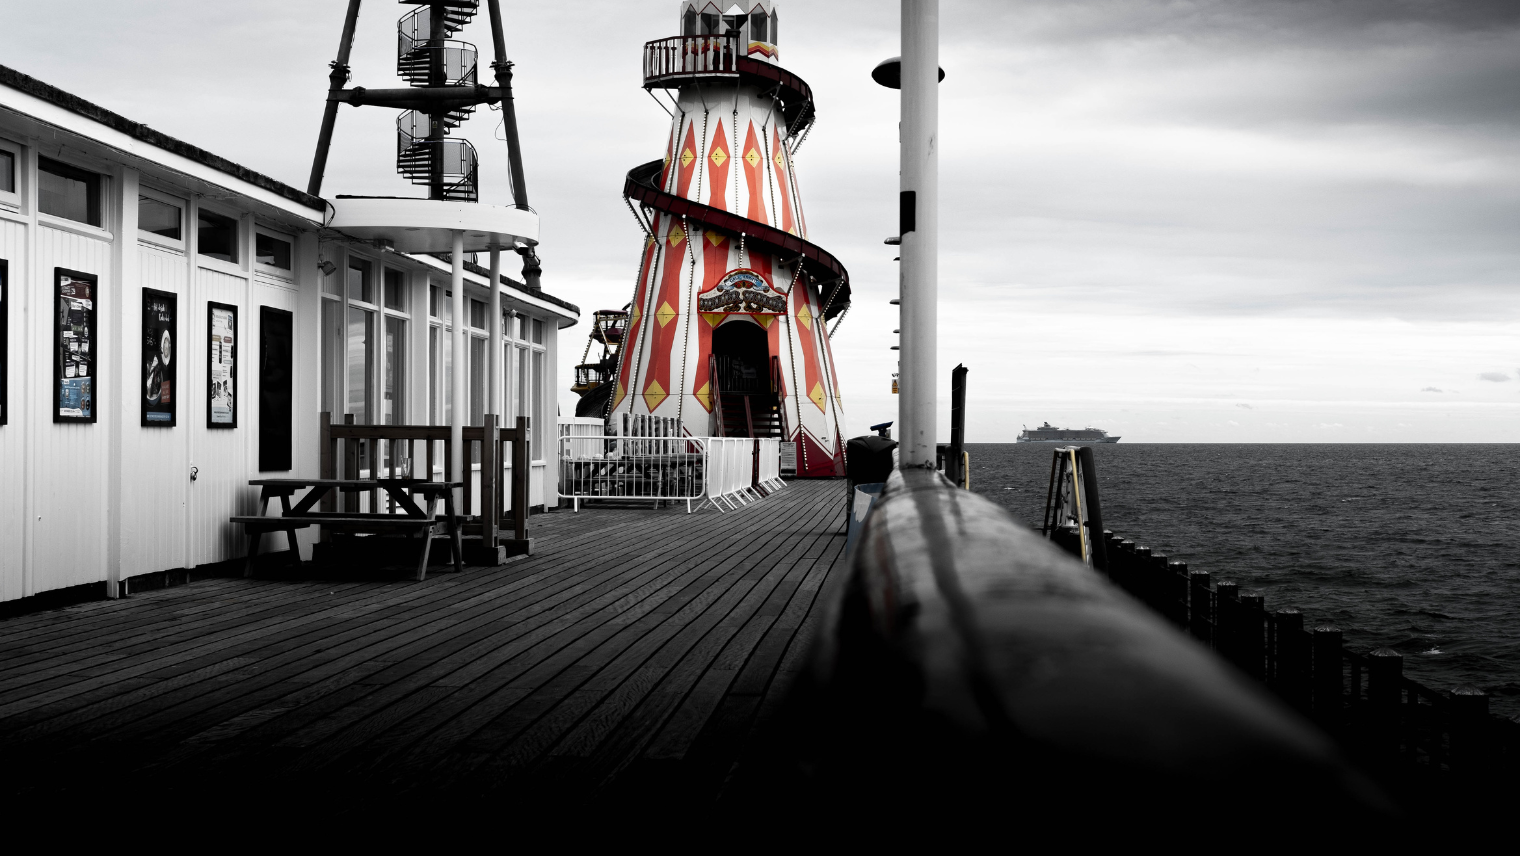 An image of Bournmouth pier